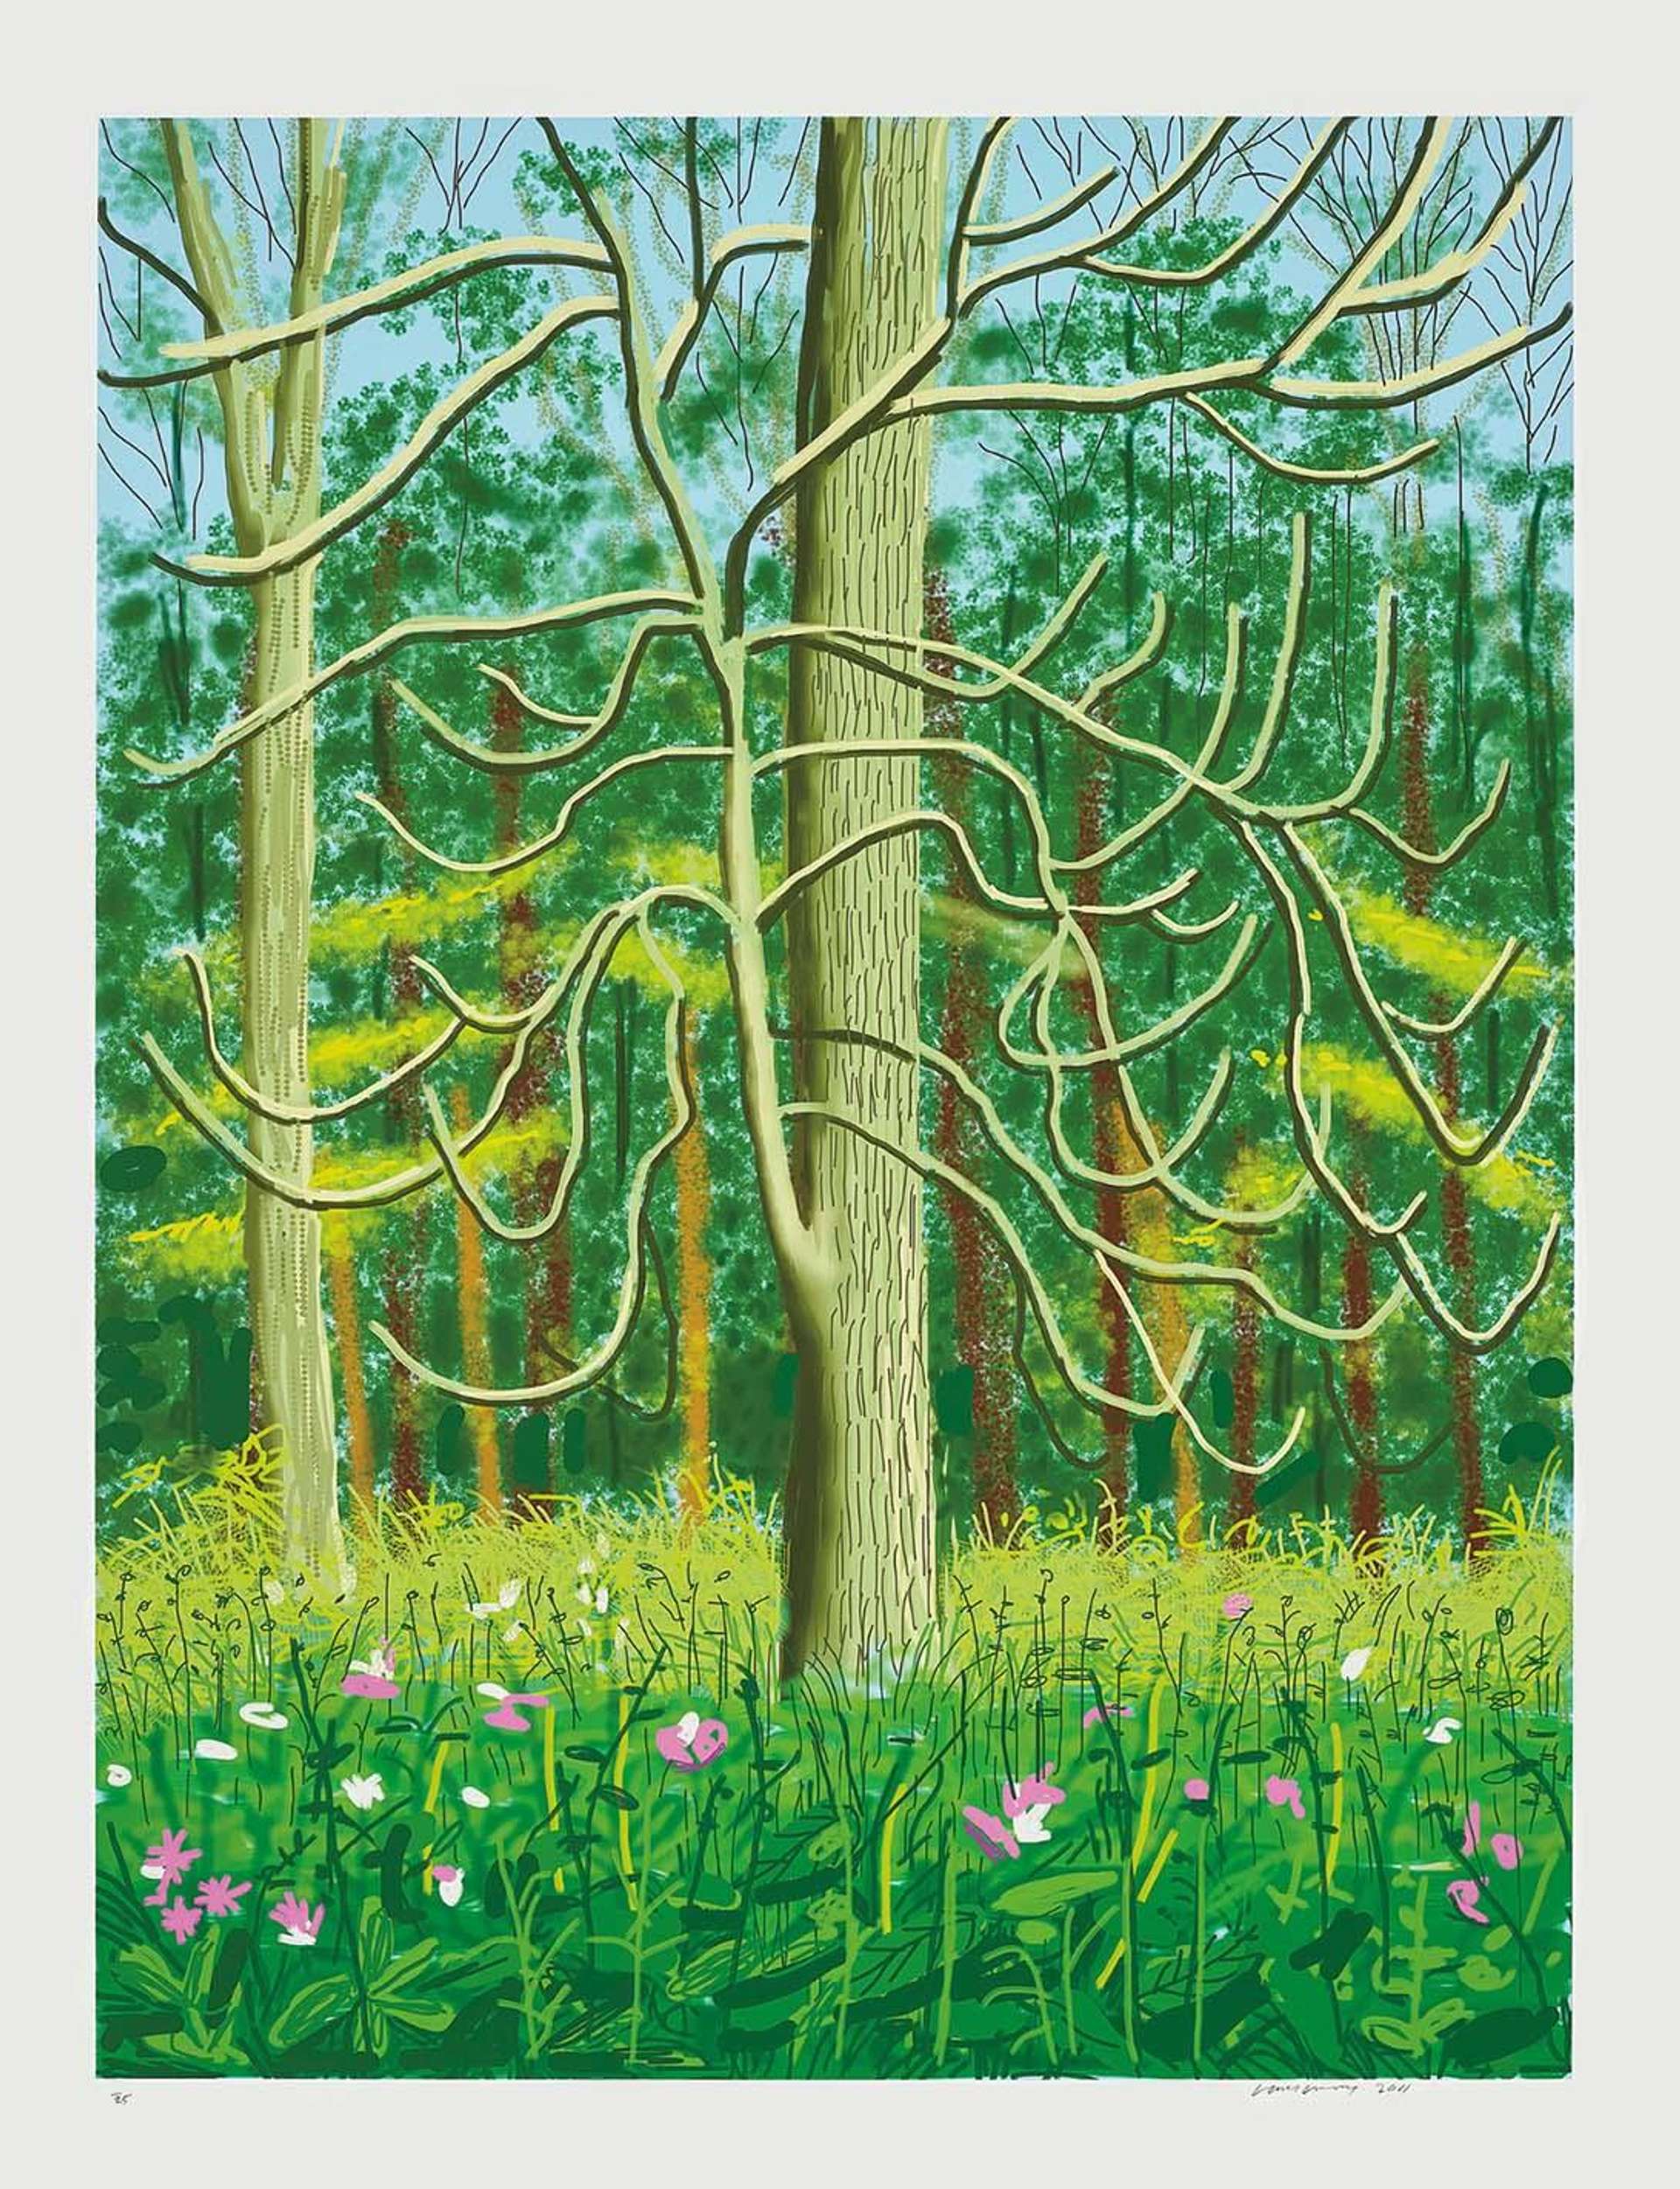 The digital print depicts a leafless tree, reaching towards the top of the composition, from a bed of grass and flowers. The entire print is executed in varying shades of vibrant green and brown, except the flowers in the foreground, which are pink and white.